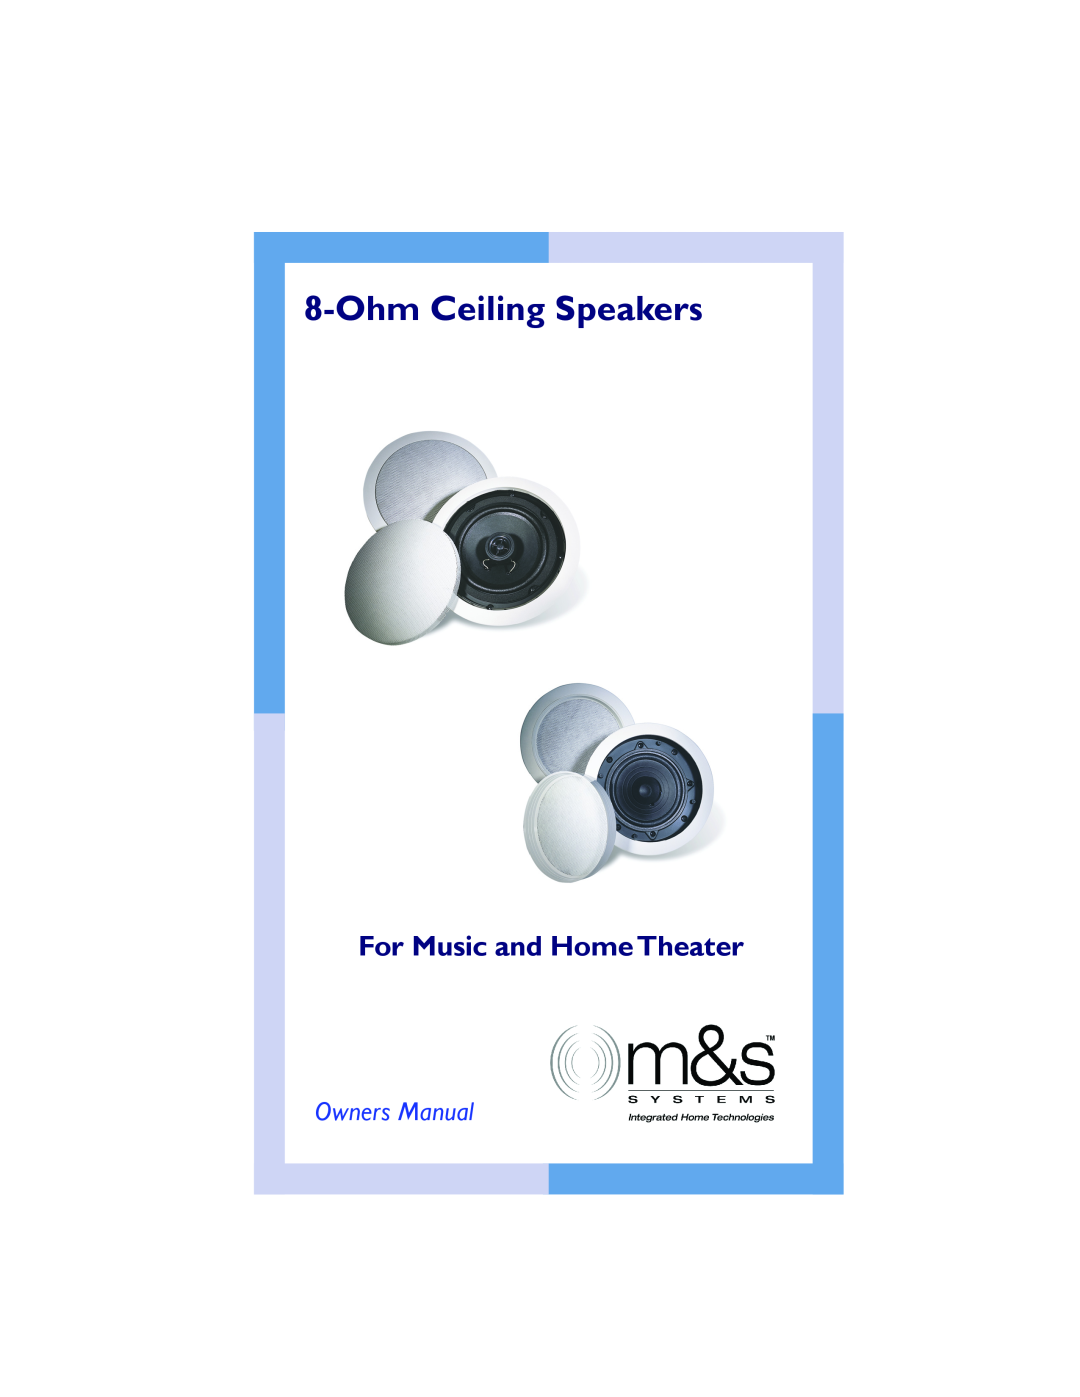 M&S Systems 8-Ohm owner manual OhmCeiling Speakers, For Music and Home Theater 